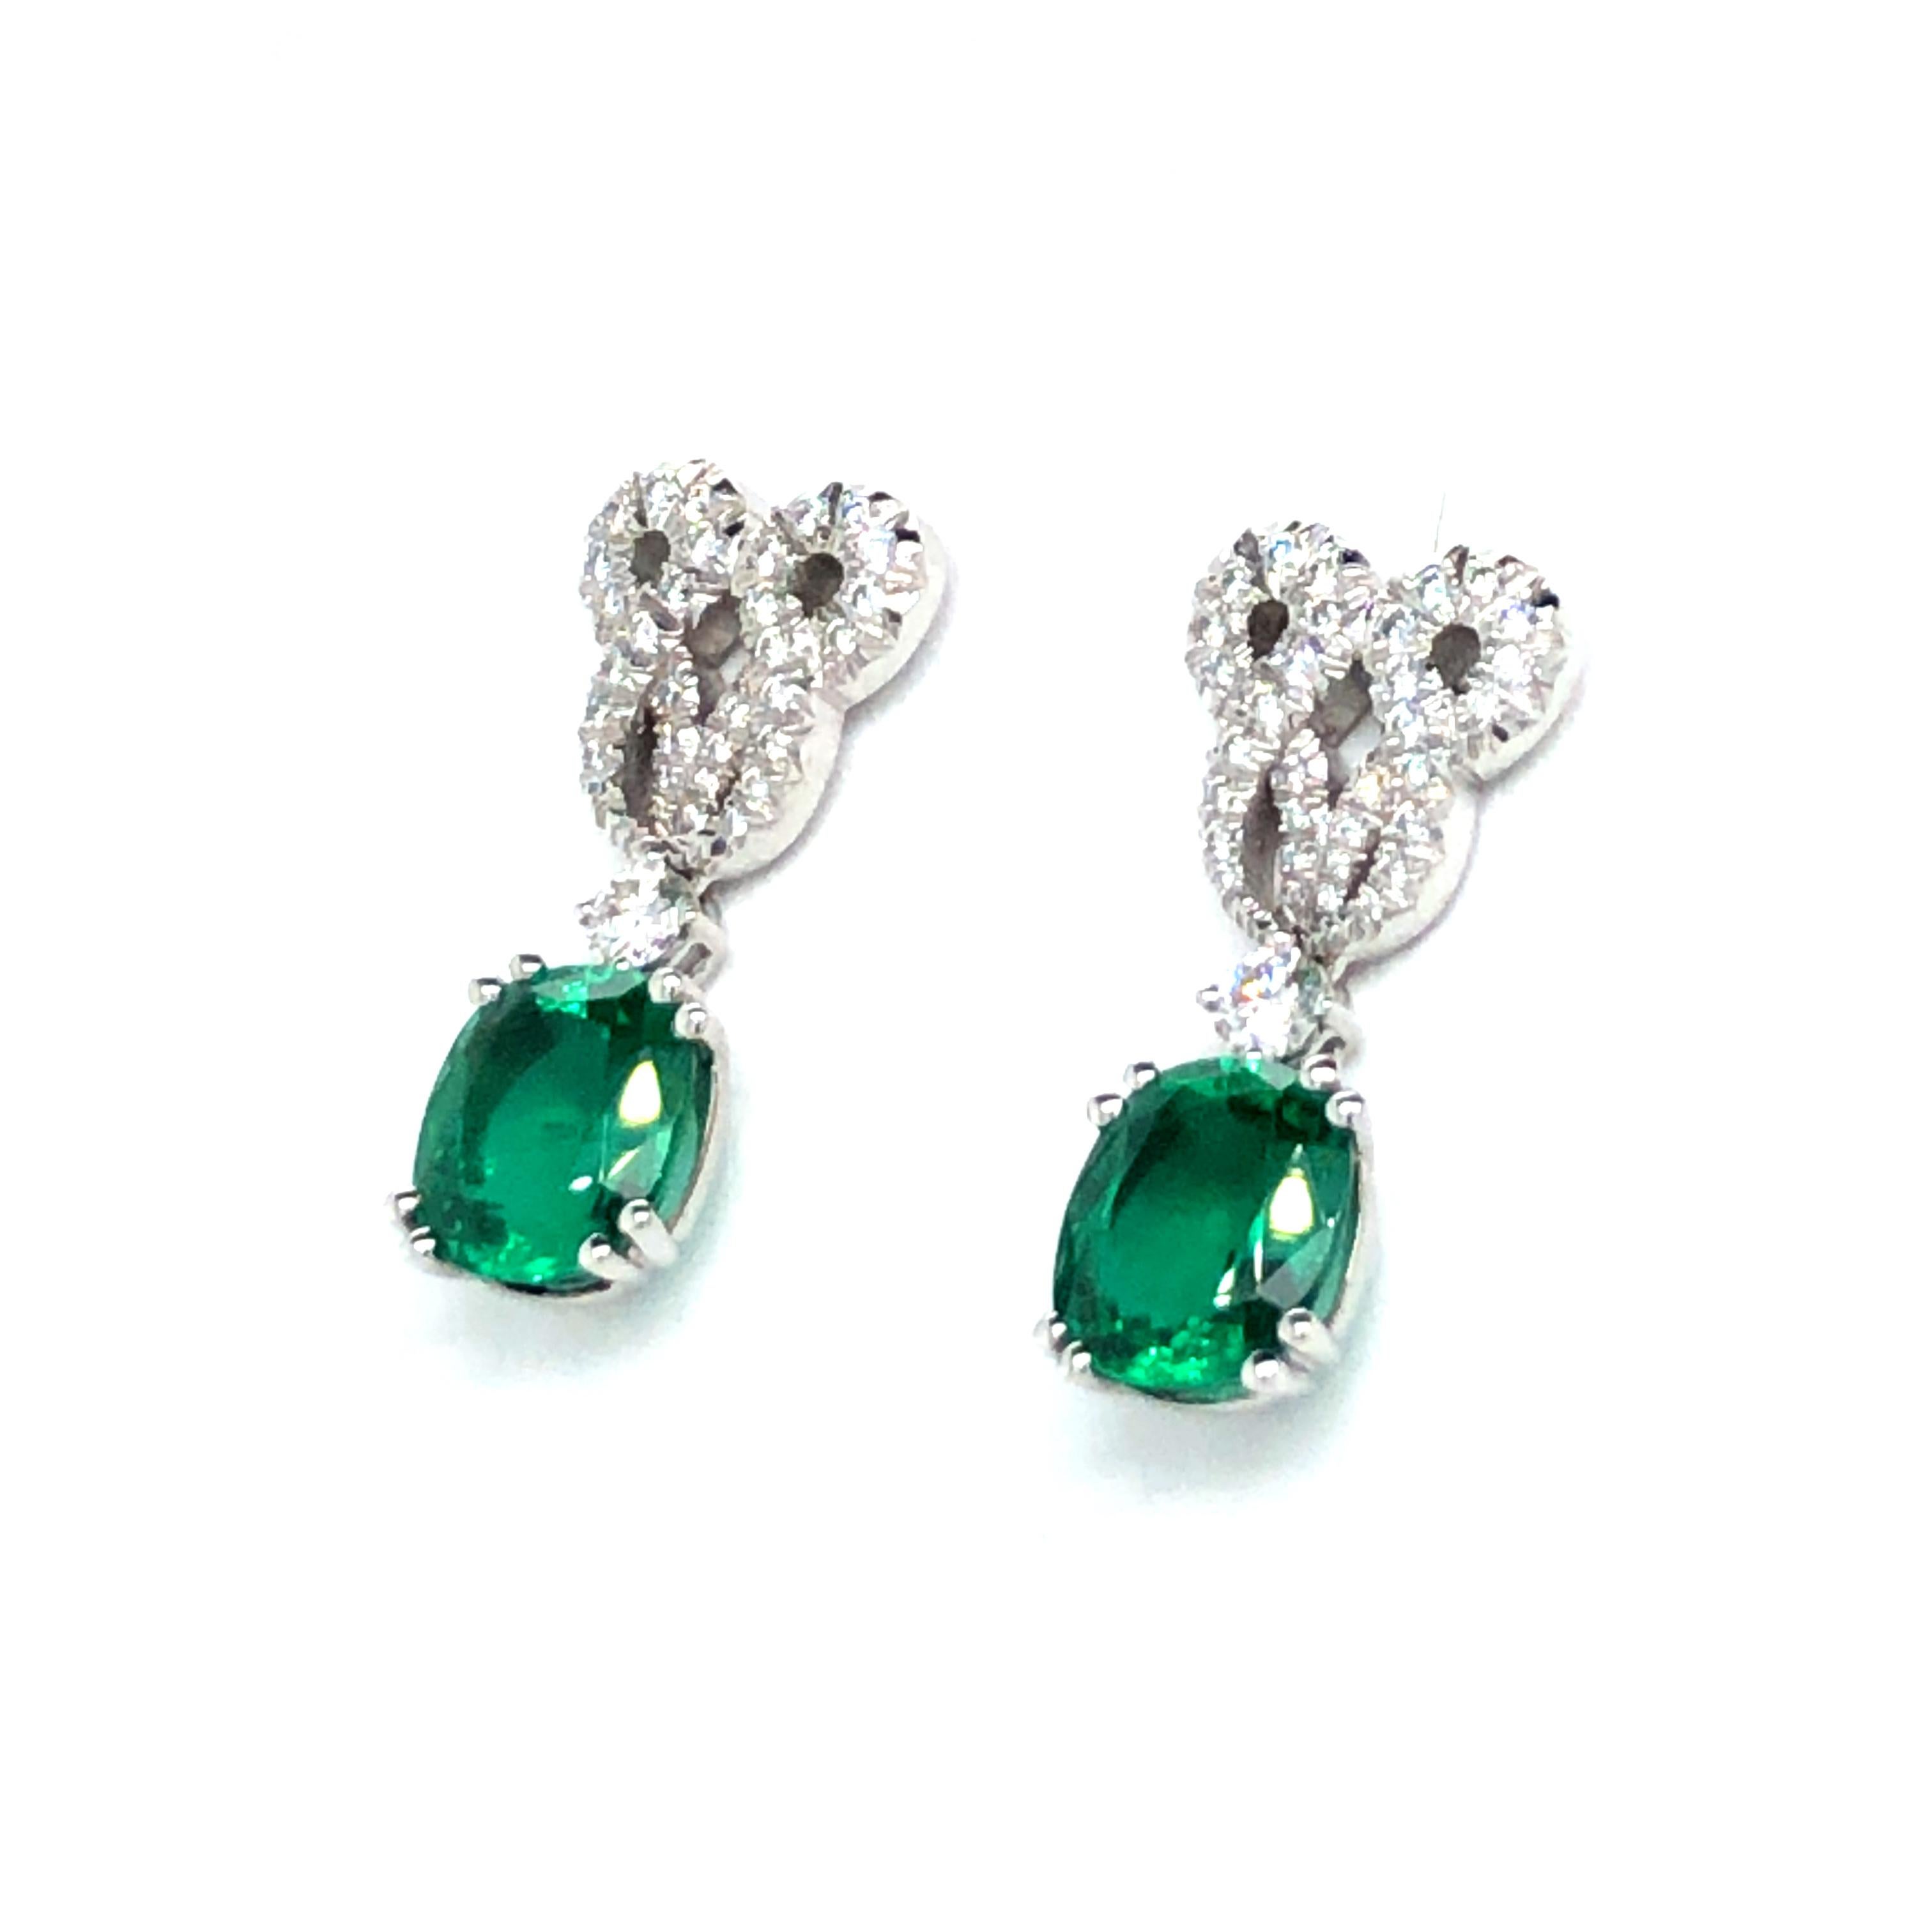 This stunning pair of earstuds by renowned Swiss jeweller Péclard features two gem quality cushion-shaped emeralds of 1.65 carats and 1.87 carats. The emeralds are set in fine double prongs and suspended from delicate scrollwork. The setting is